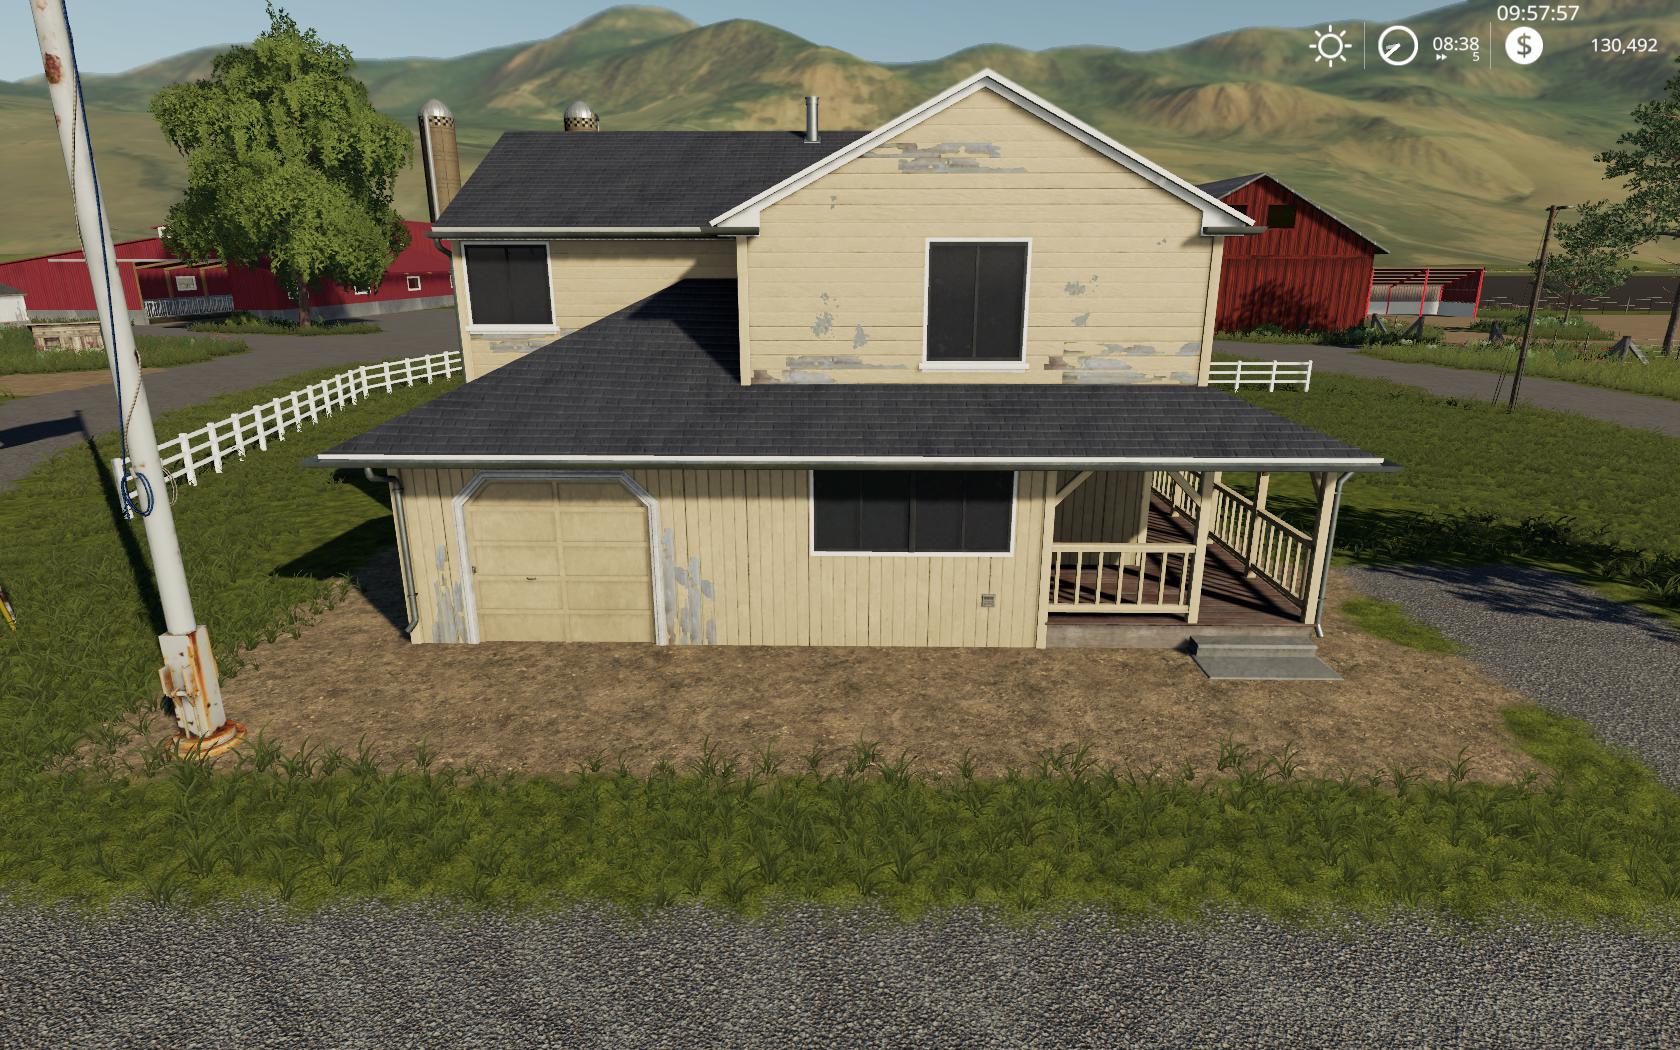 Placeable 4 bedroom house with sleep trigger v 1.0